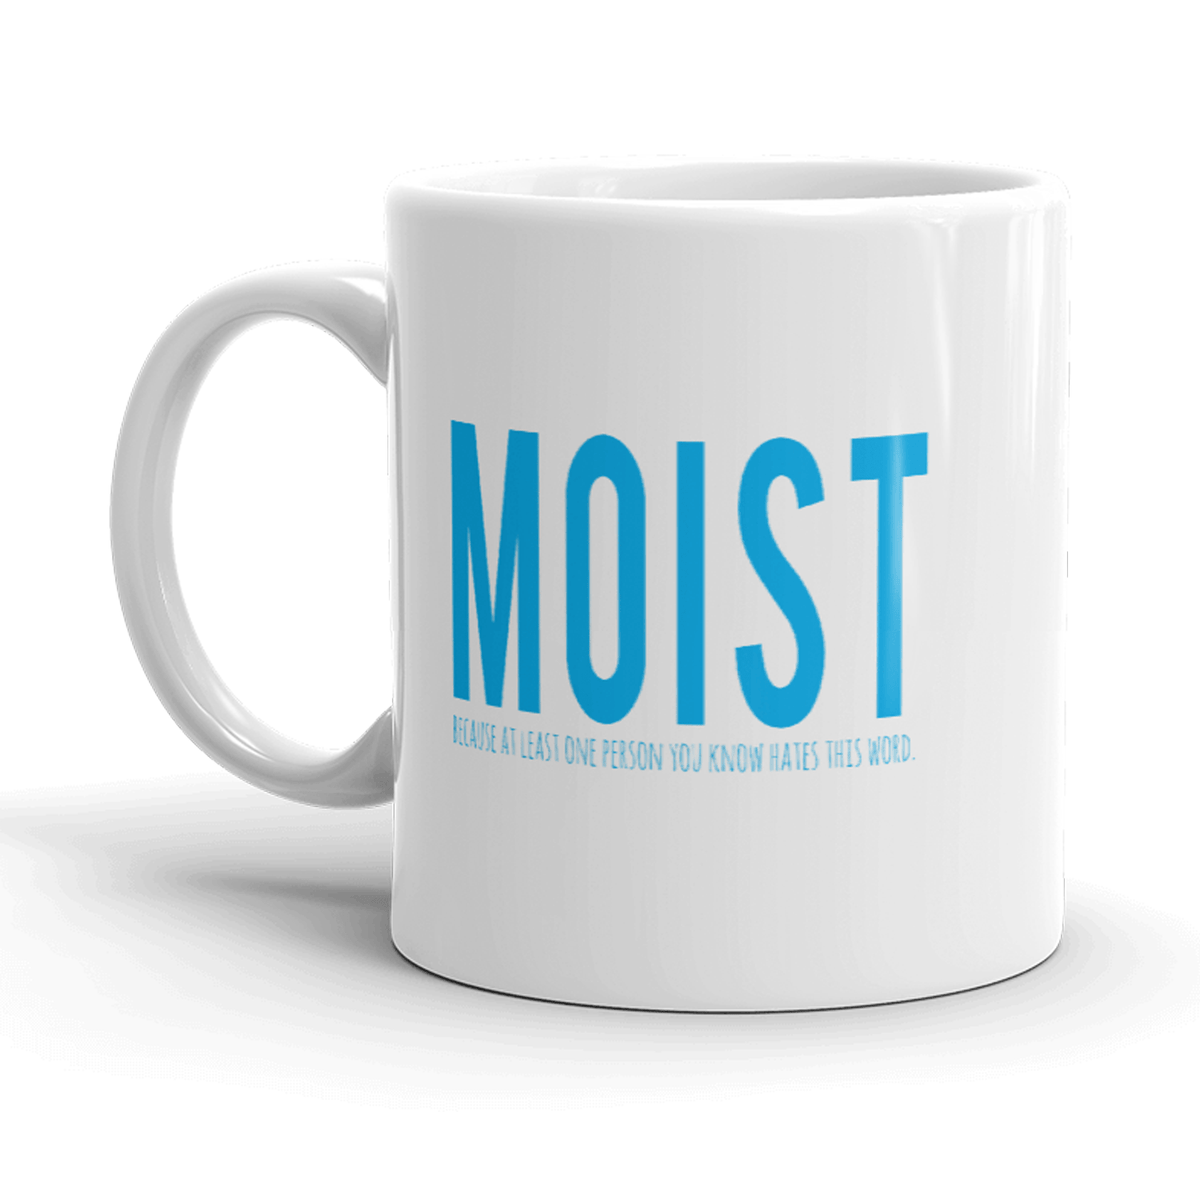 Moist Because Someone Hates This Word Mug Funny Novelty Cofee Cup-11oz  -  Crazy Dog T-Shirts